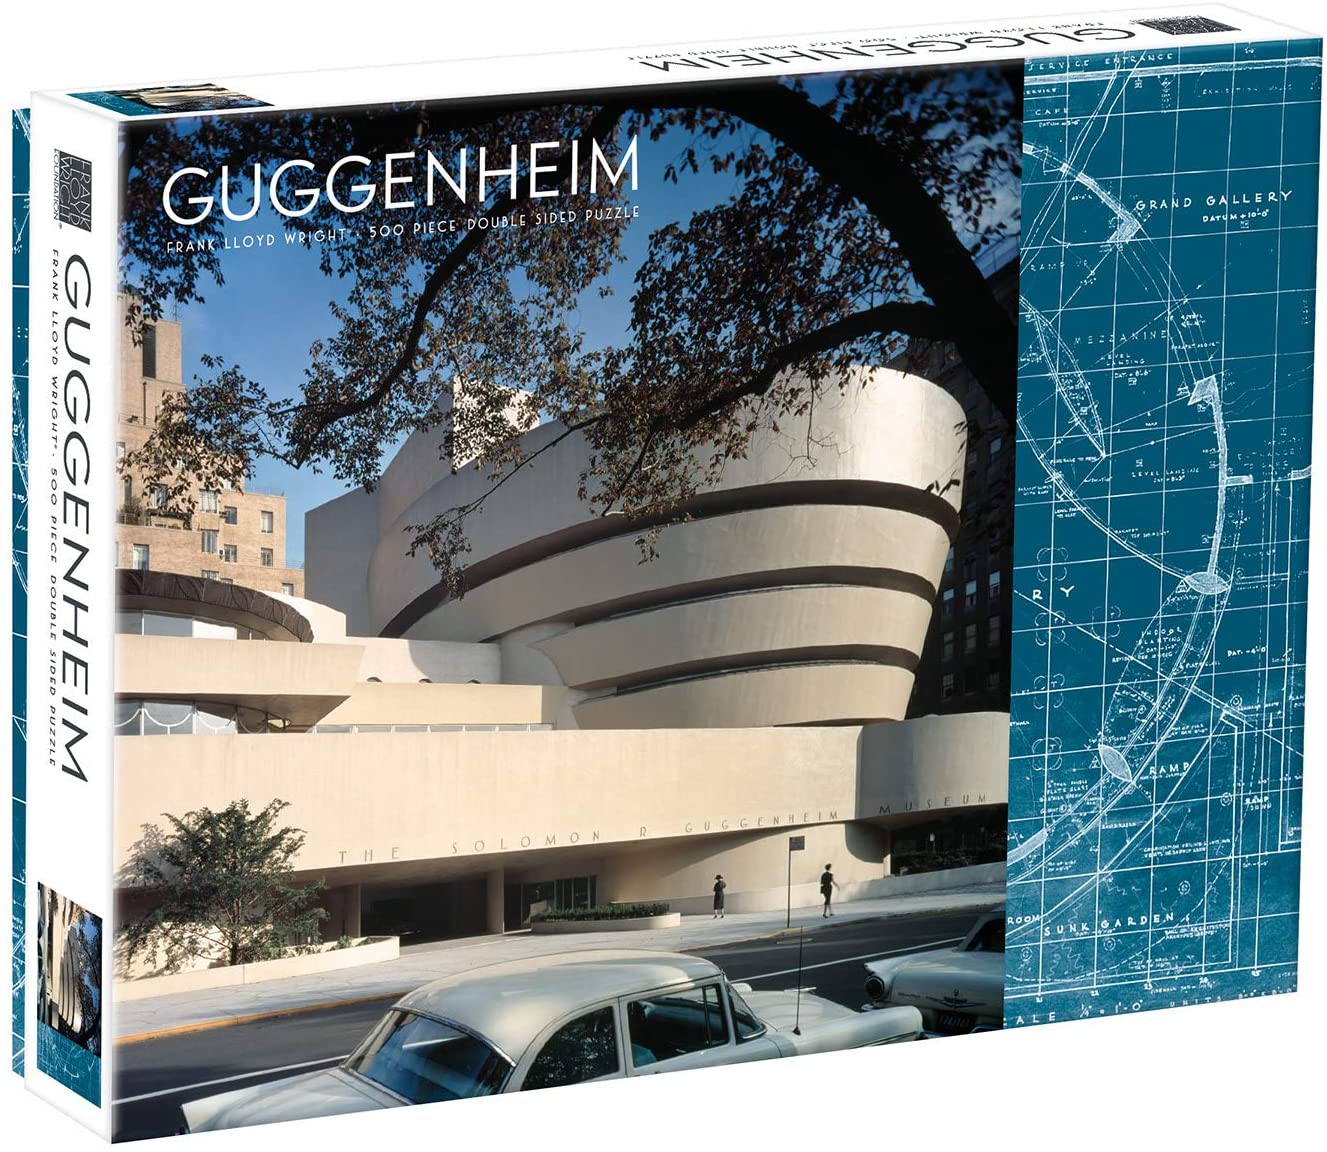 Frank Lloyd Wright Guggenheim (500 double-sided pc puzzle)